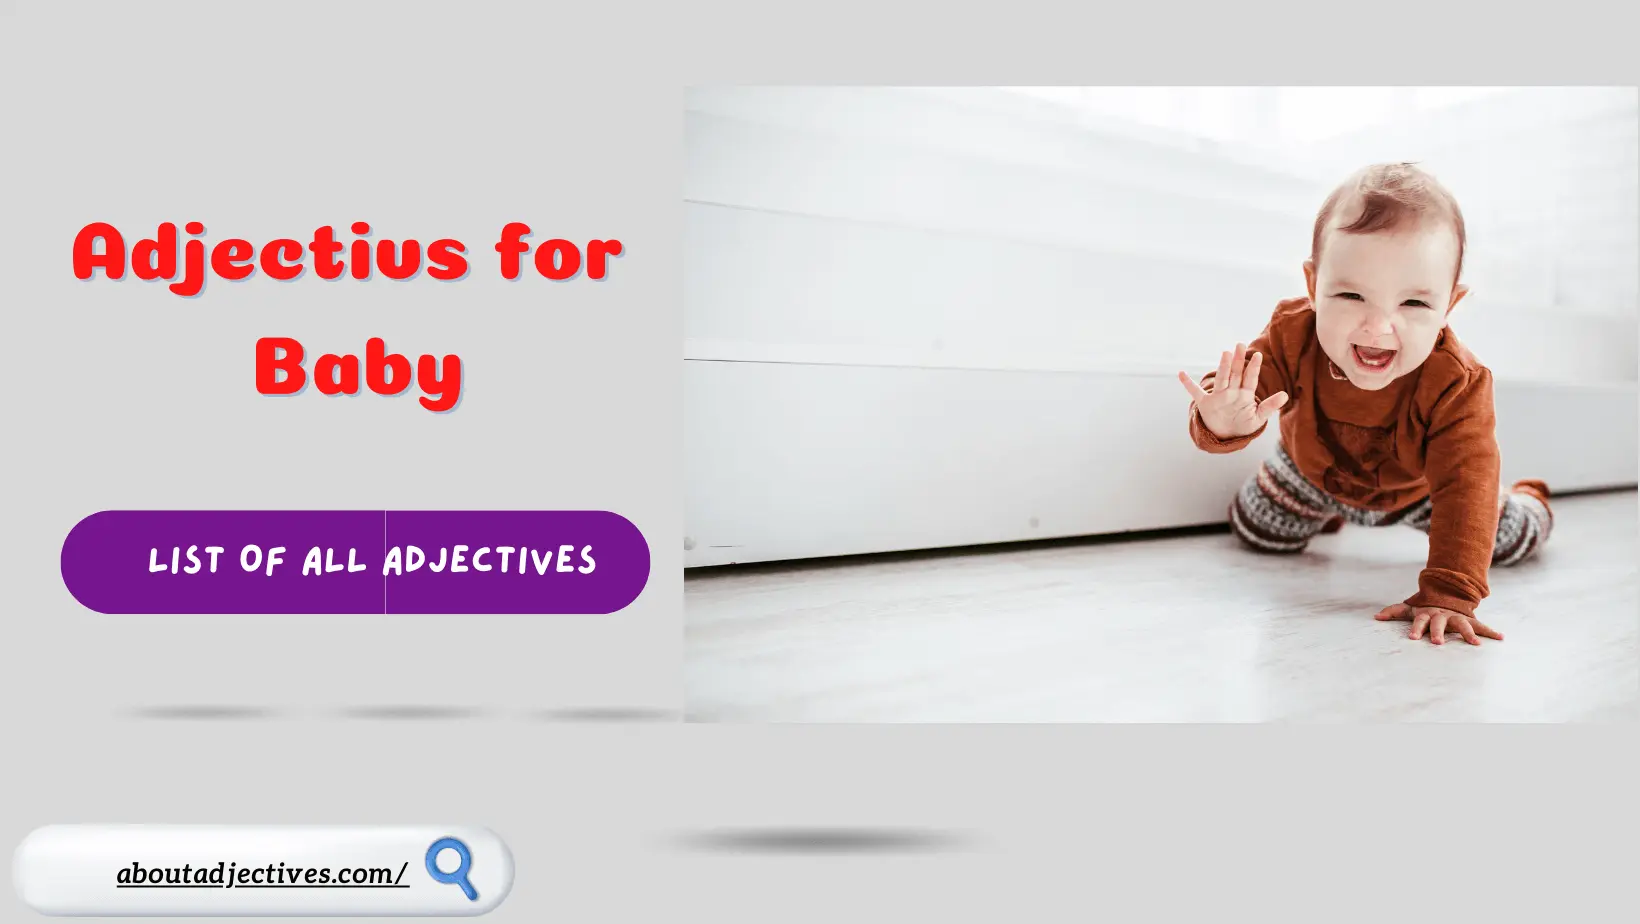 Adjectives for Baby